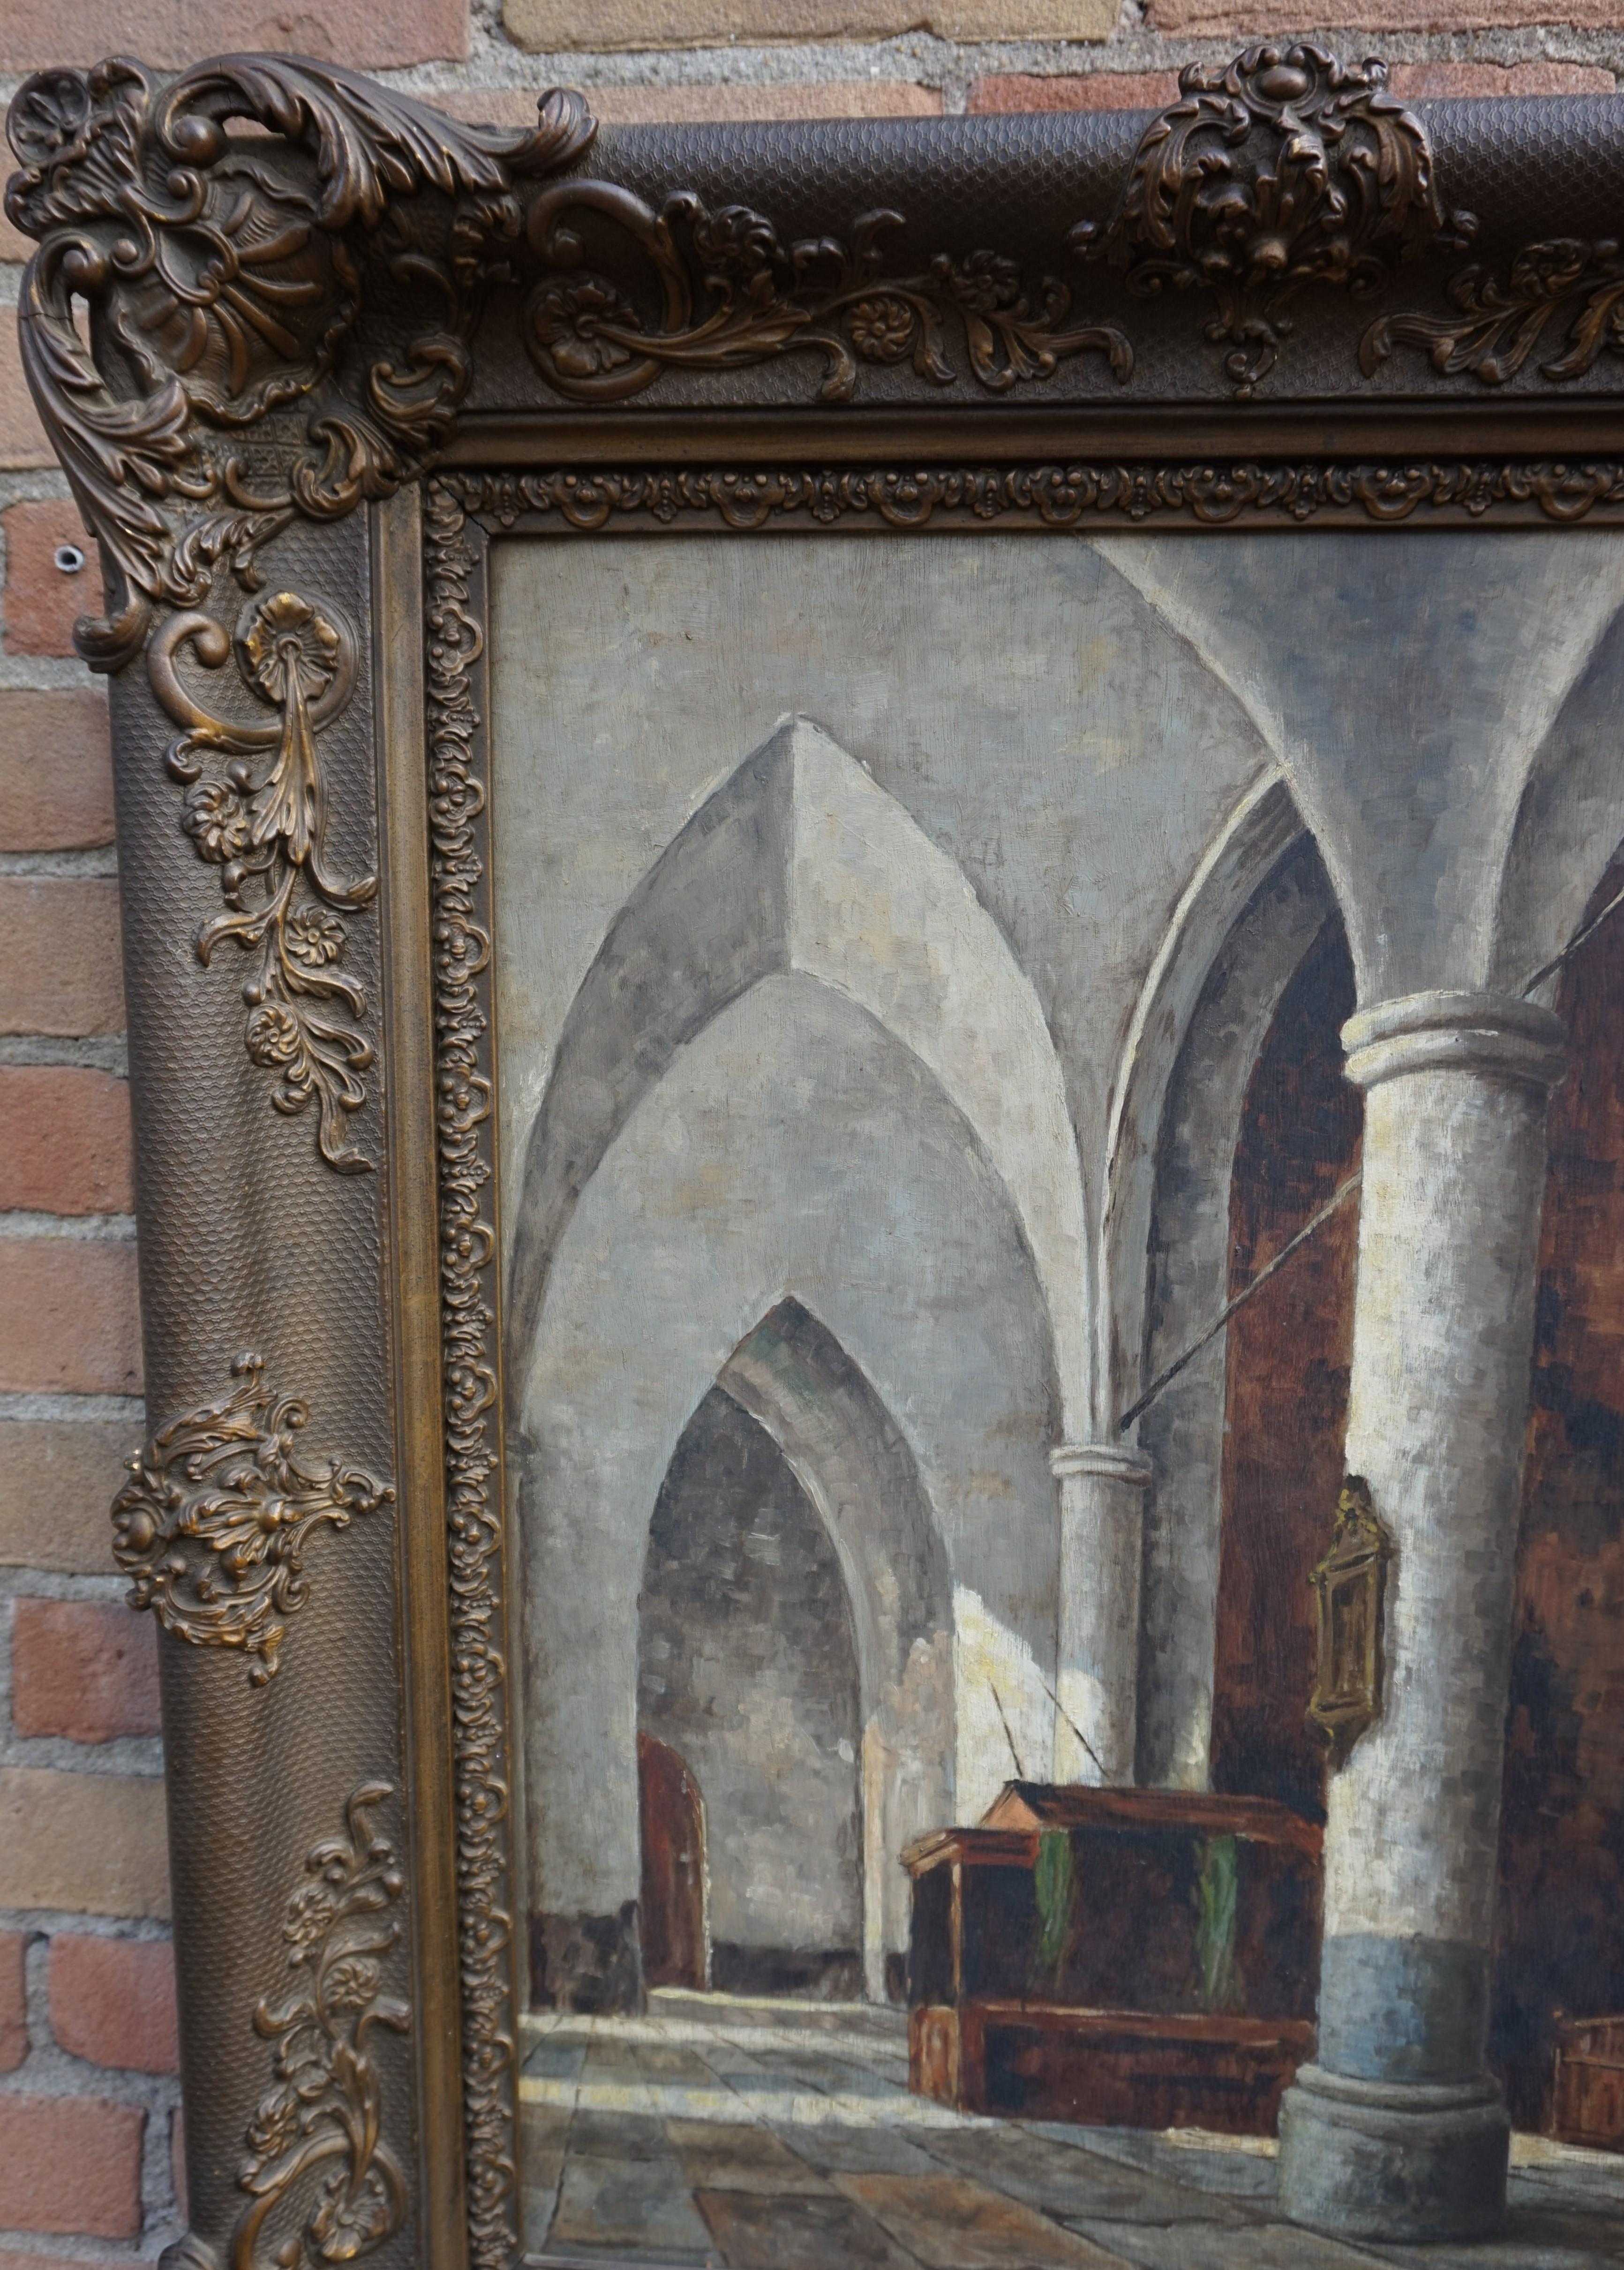 Hand-Painted Antique and Unique Gothic Church Interior Painting in a Stunning Mid-1800s Frame